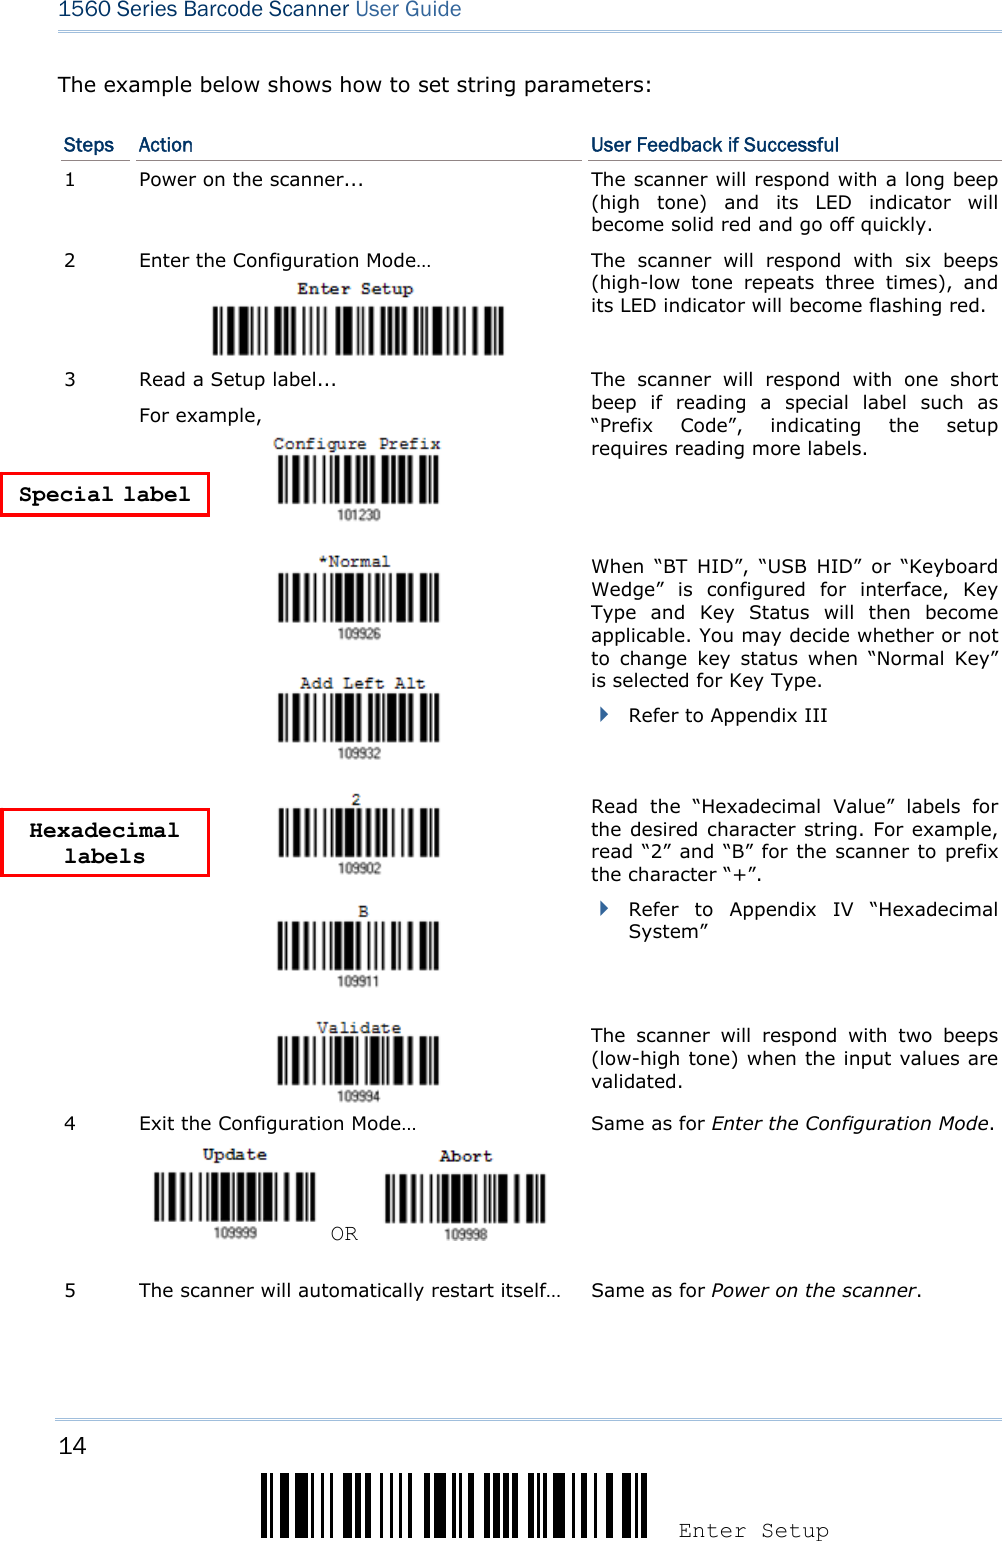 14 Enter Setup 1560 Series Barcode Scanner User Guide  The example below shows how to set string parameters: Steps  Action  User Feedback if Successful 1  Power on the scanner...  The scanner will respond with a long beep (high tone) and its LED indicator will become solid red and go off quickly. 2  Enter the Configuration Mode…  The scanner will respond with six beeps (high-low tone repeats three times), and its LED indicator will become flashing red.  Read a Setup label... For example,   The scanner will respond with one short beep if reading a special label such as “Prefix Code”, indicating the setup requires reading more labels.        When “BT HID”, “USB HID” or “Keyboard Wedge” is configured for interface, Key Type and Key Status will then become applicable. You may decide whether or not to change key status when “Normal Key” is selected for Key Type.  Refer to Appendix III 3      Read the “Hexadecimal Value” labels for the desired character string. For example, read “2” and “B” for the scanner to prefix the character “+”.  Refer to Appendix IV “Hexadecimal System”   The scanner will respond with two beeps (low-high tone) when the input values are validated. 4  Exit the Configuration Mode…   OR     Same as for Enter the Configuration Mode. 5  The scanner will automatically restart itself…  Same as for Power on the scanner.  Special label Hexadecimal labels 